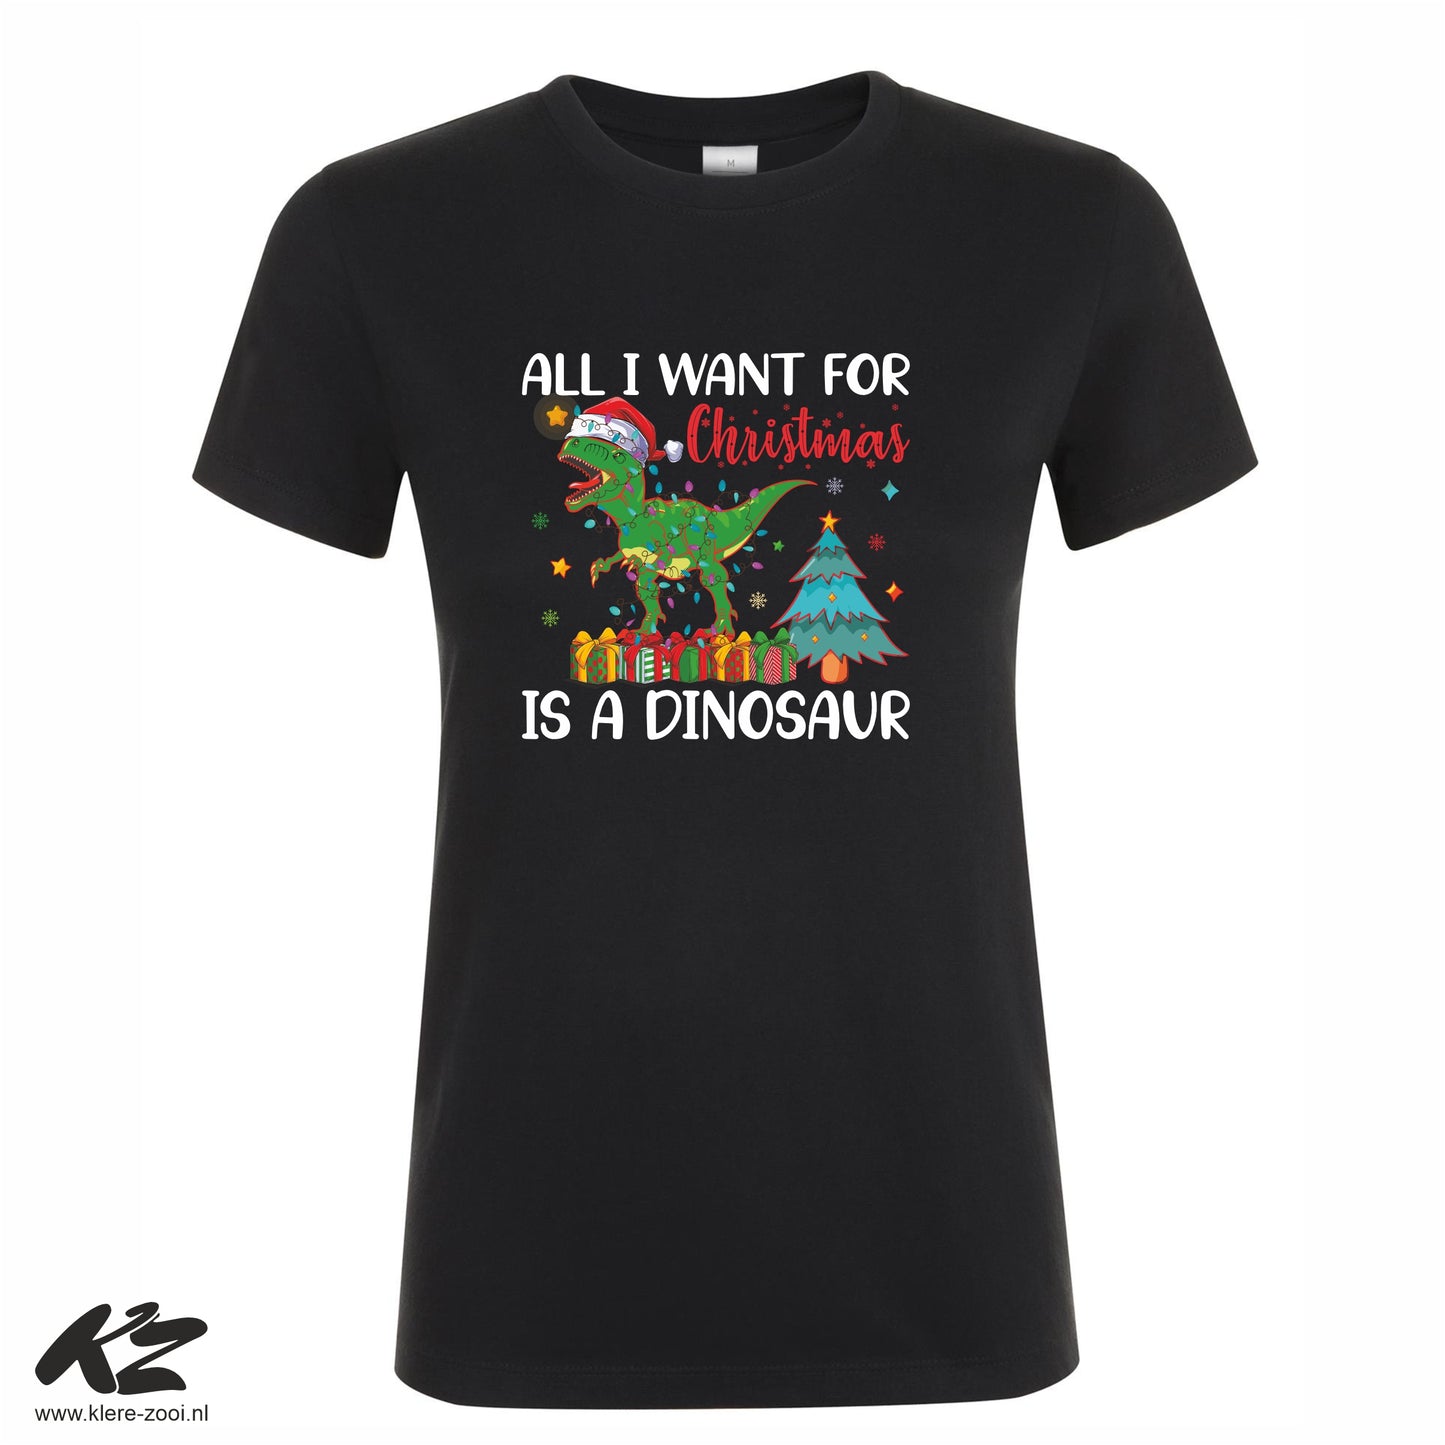 All I Want for Christmas is a Dinosaur